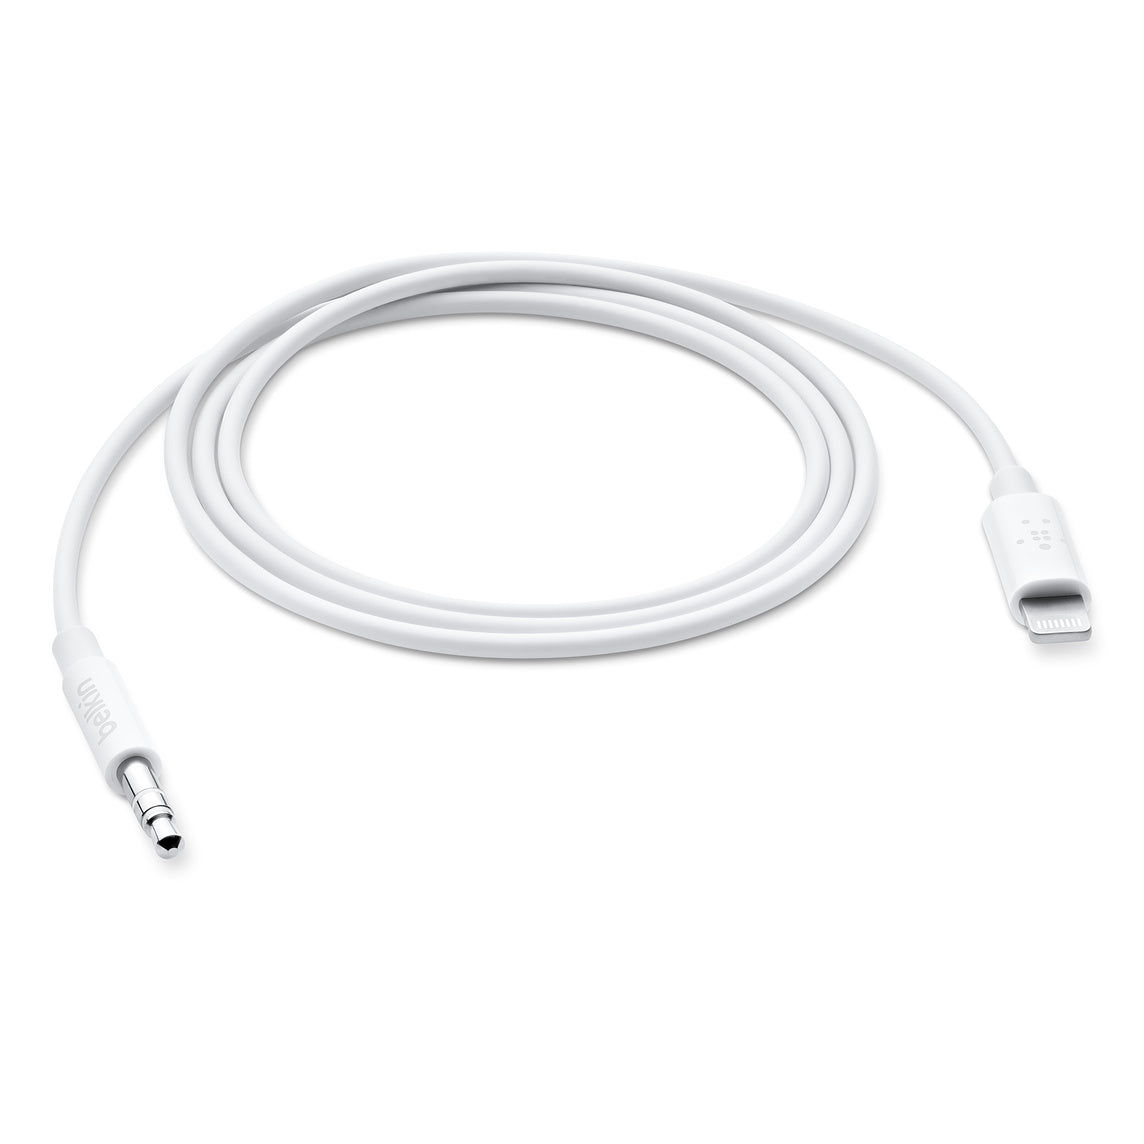 Belkin 3' Lightning to 3.5mm Aux Audio Cable - White